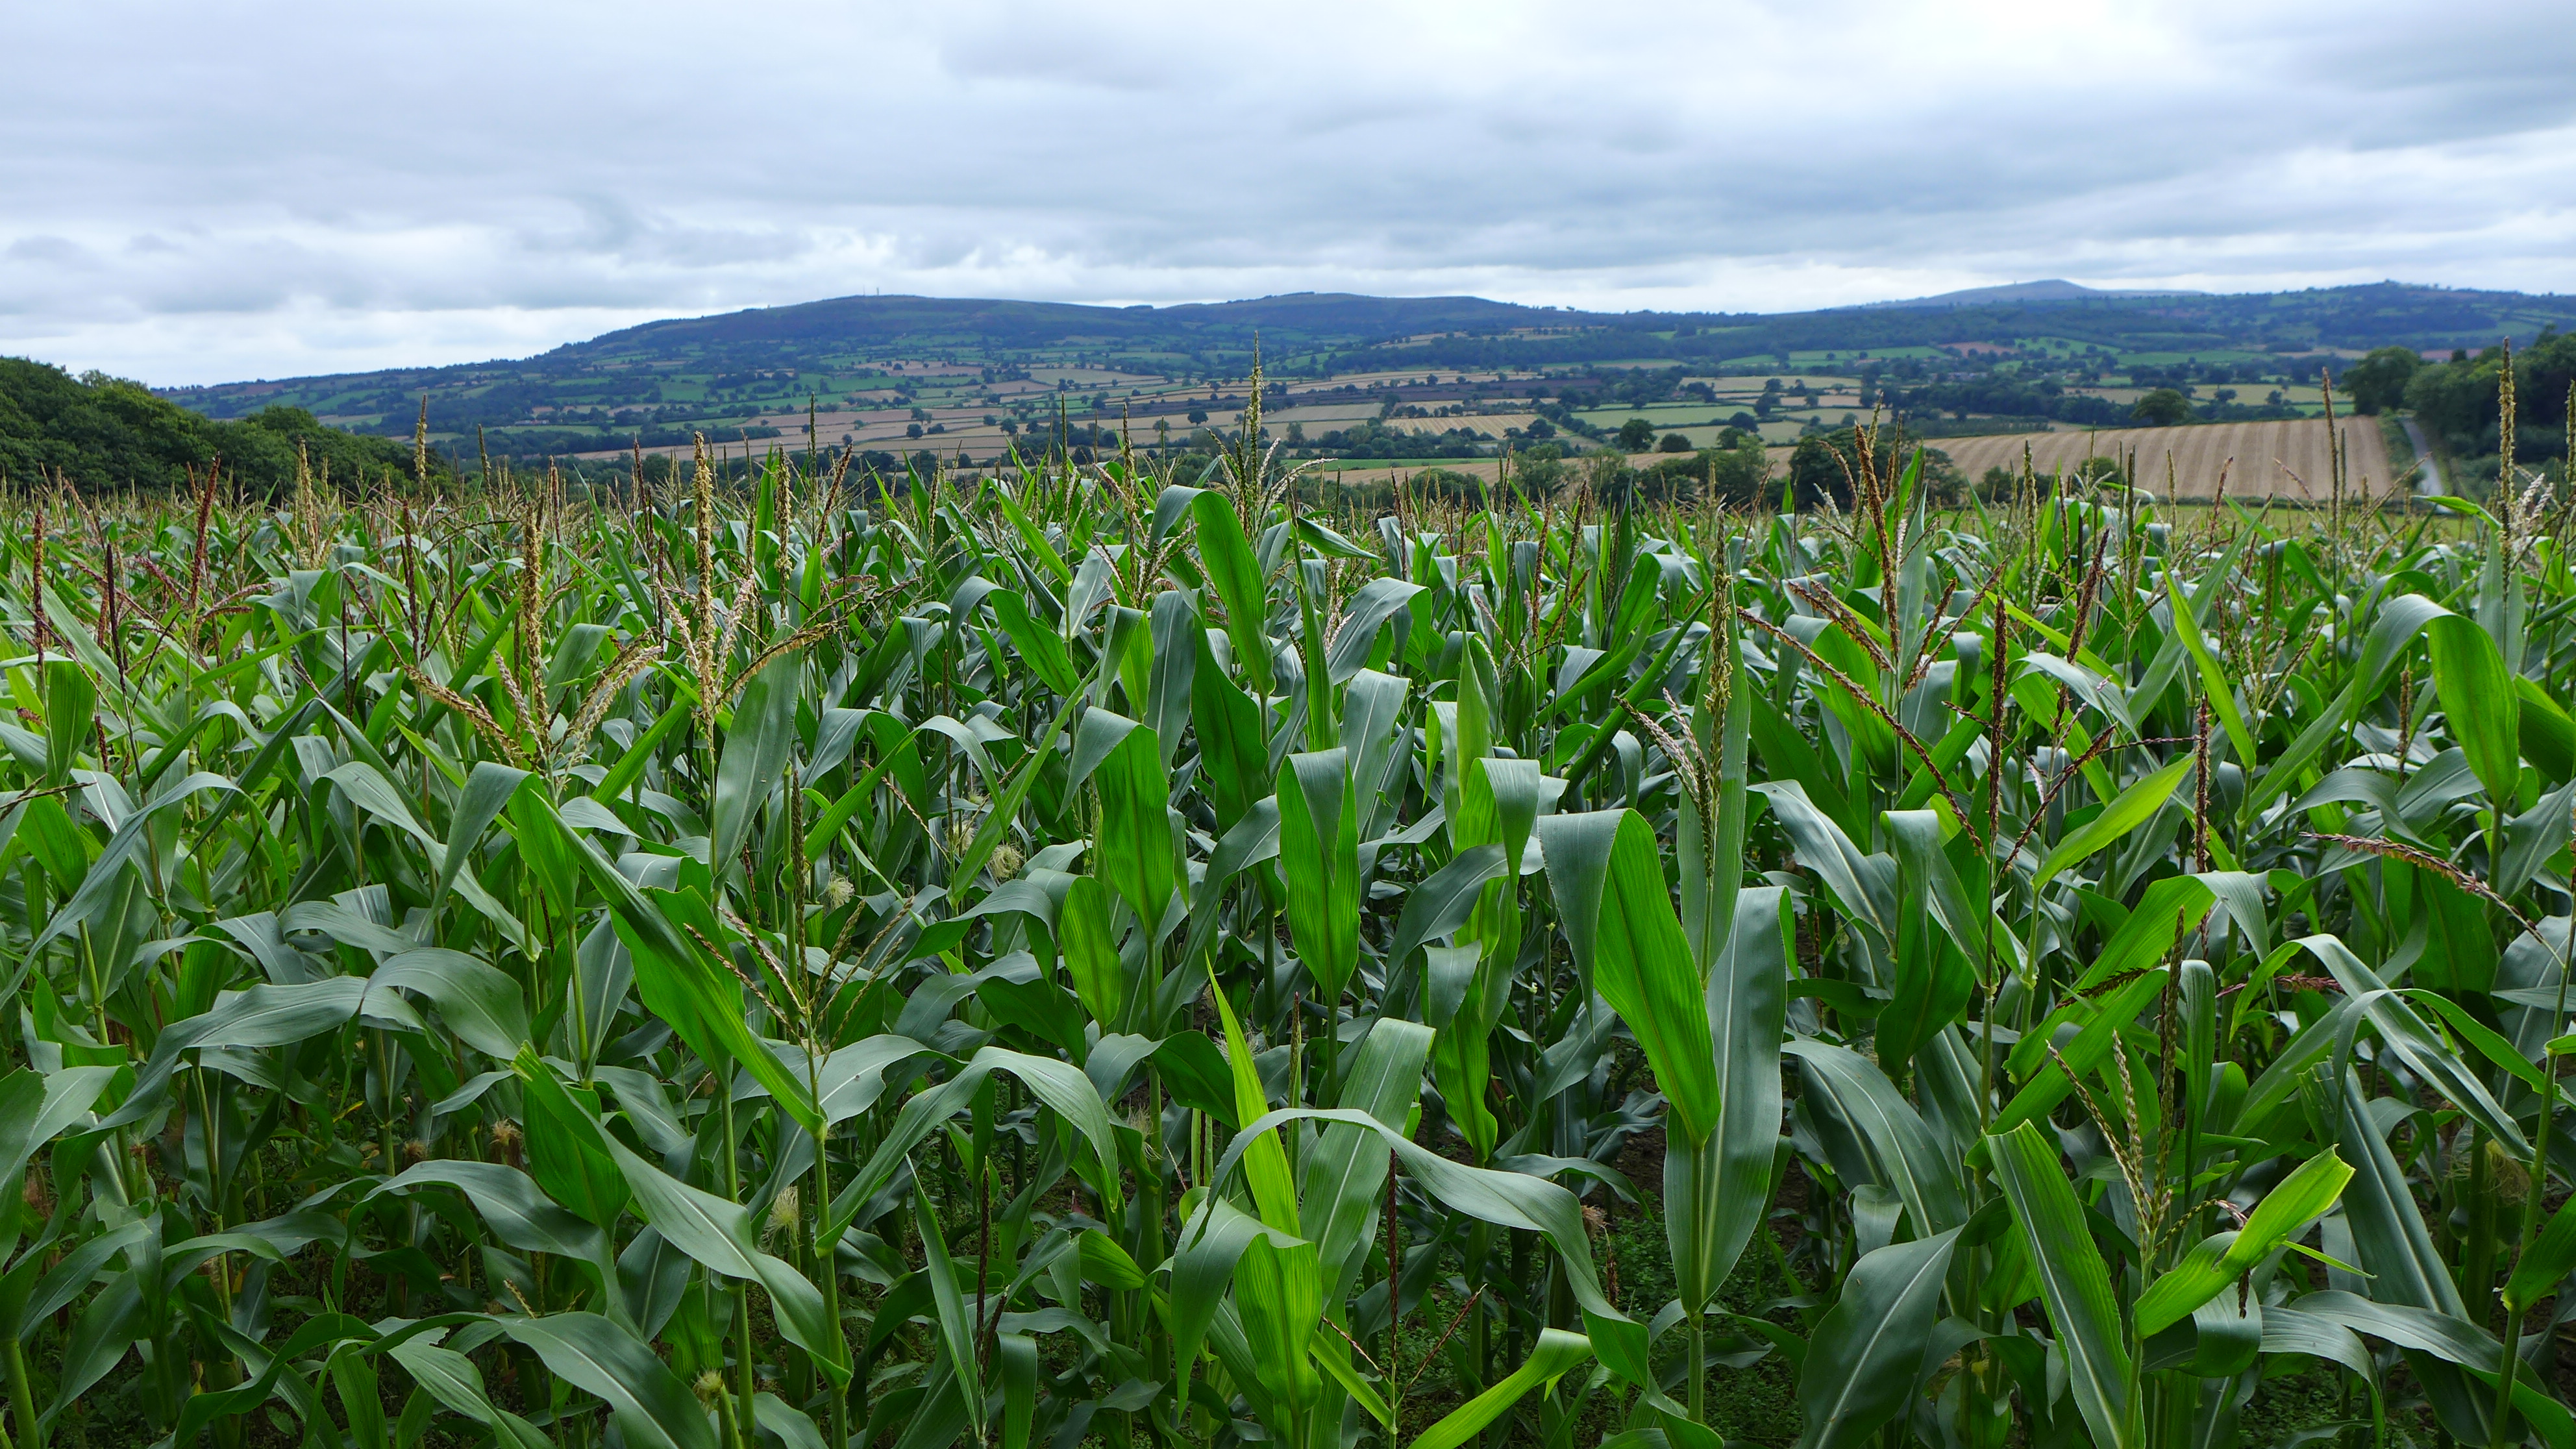 Maize: Season review and post-harvest soil management with cover